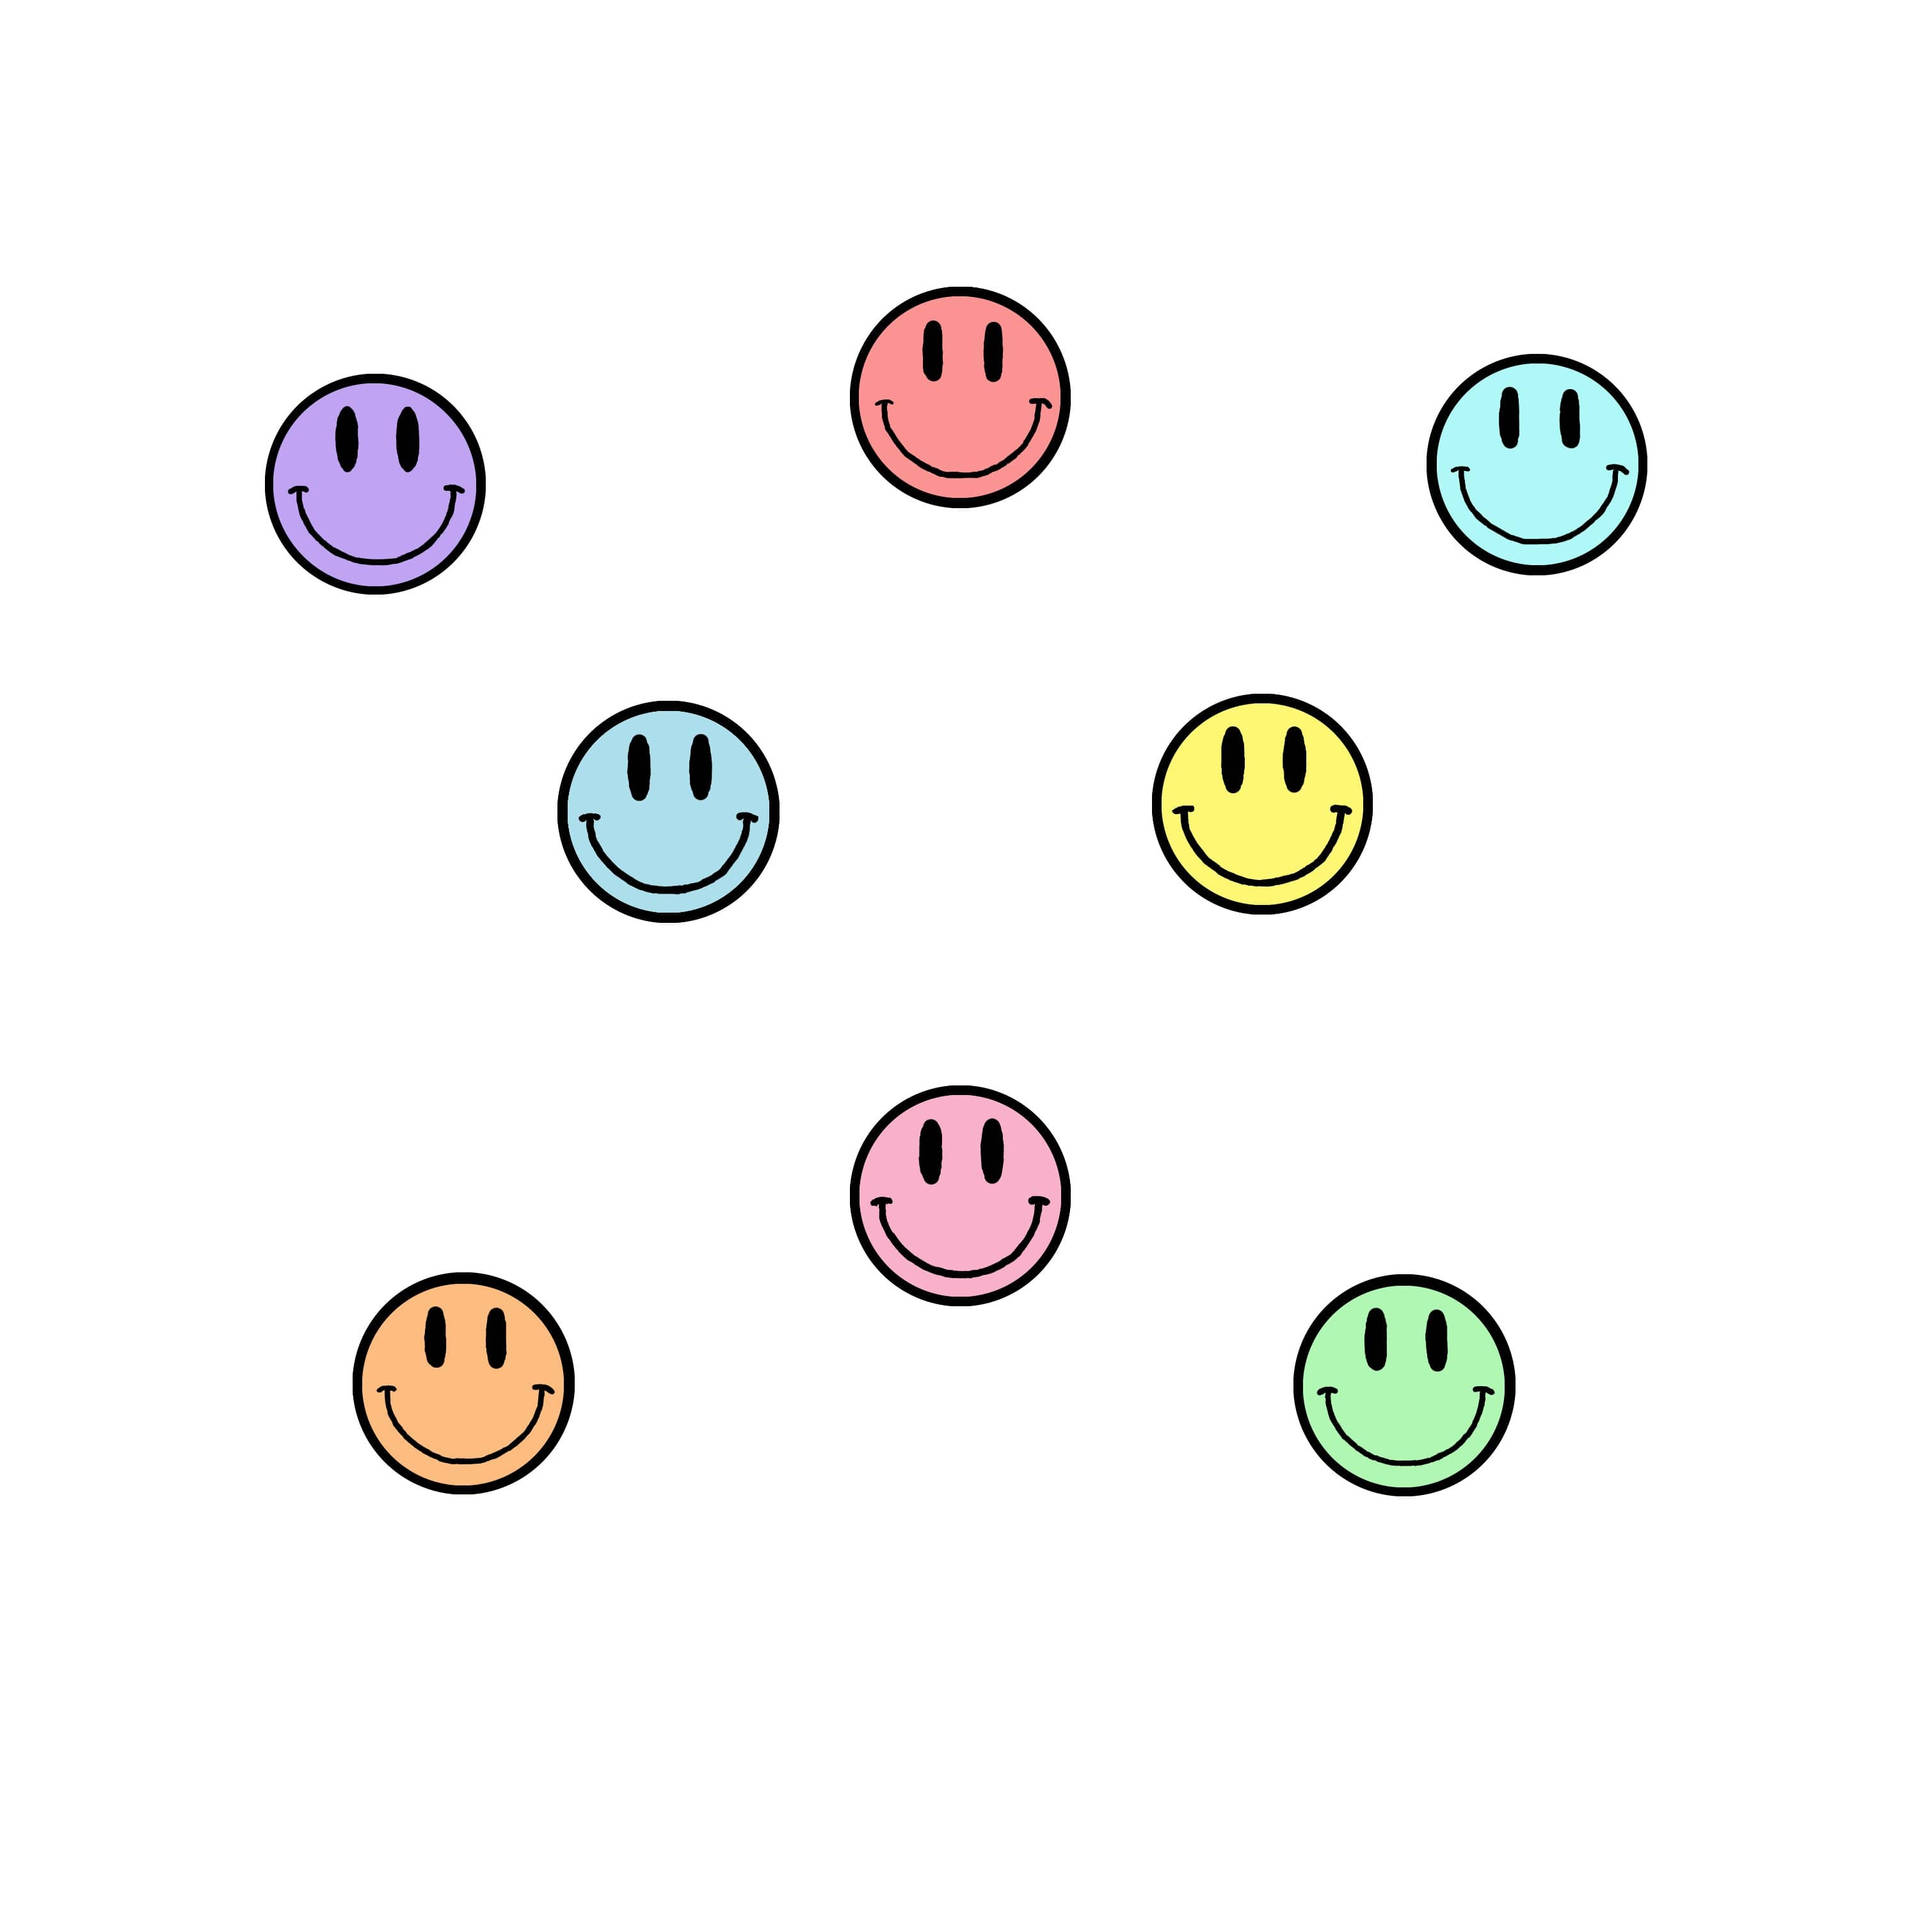 A Cheerful Preppy Smiley Face Wallpaper